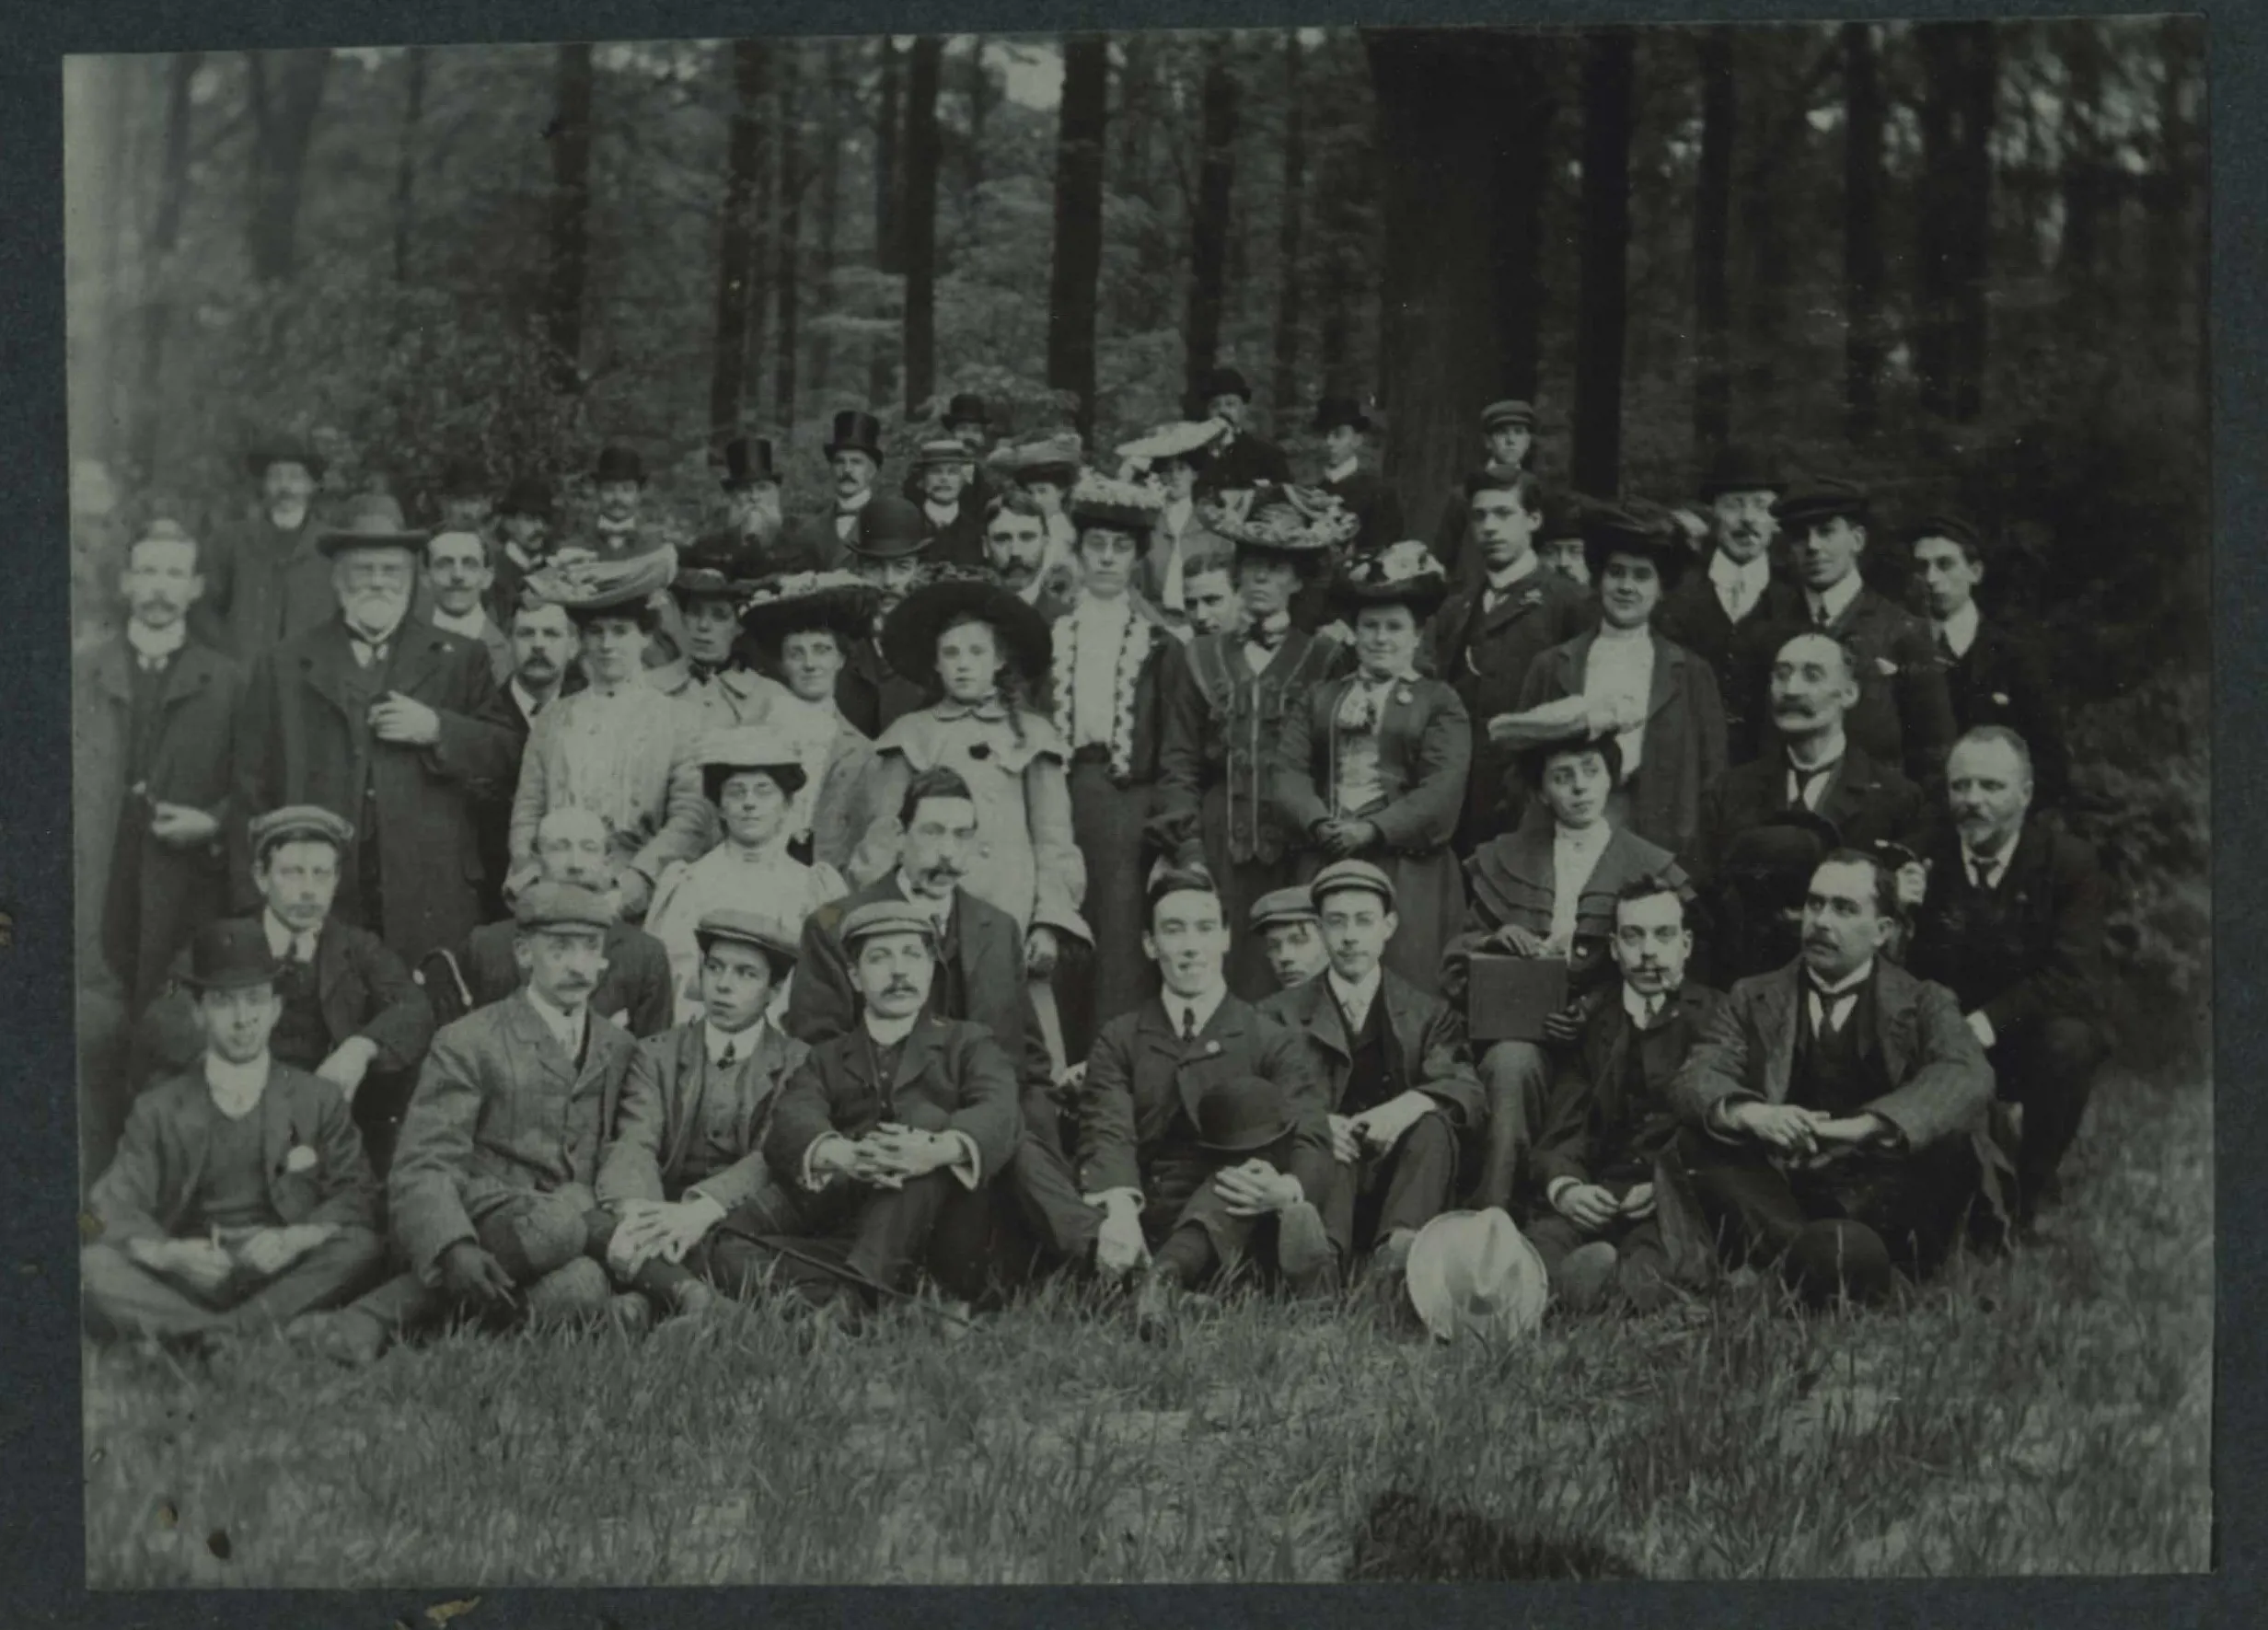 Photograph of The Junior Institution of Engineers visit to Glory Woods, Dorking, 1903-1909